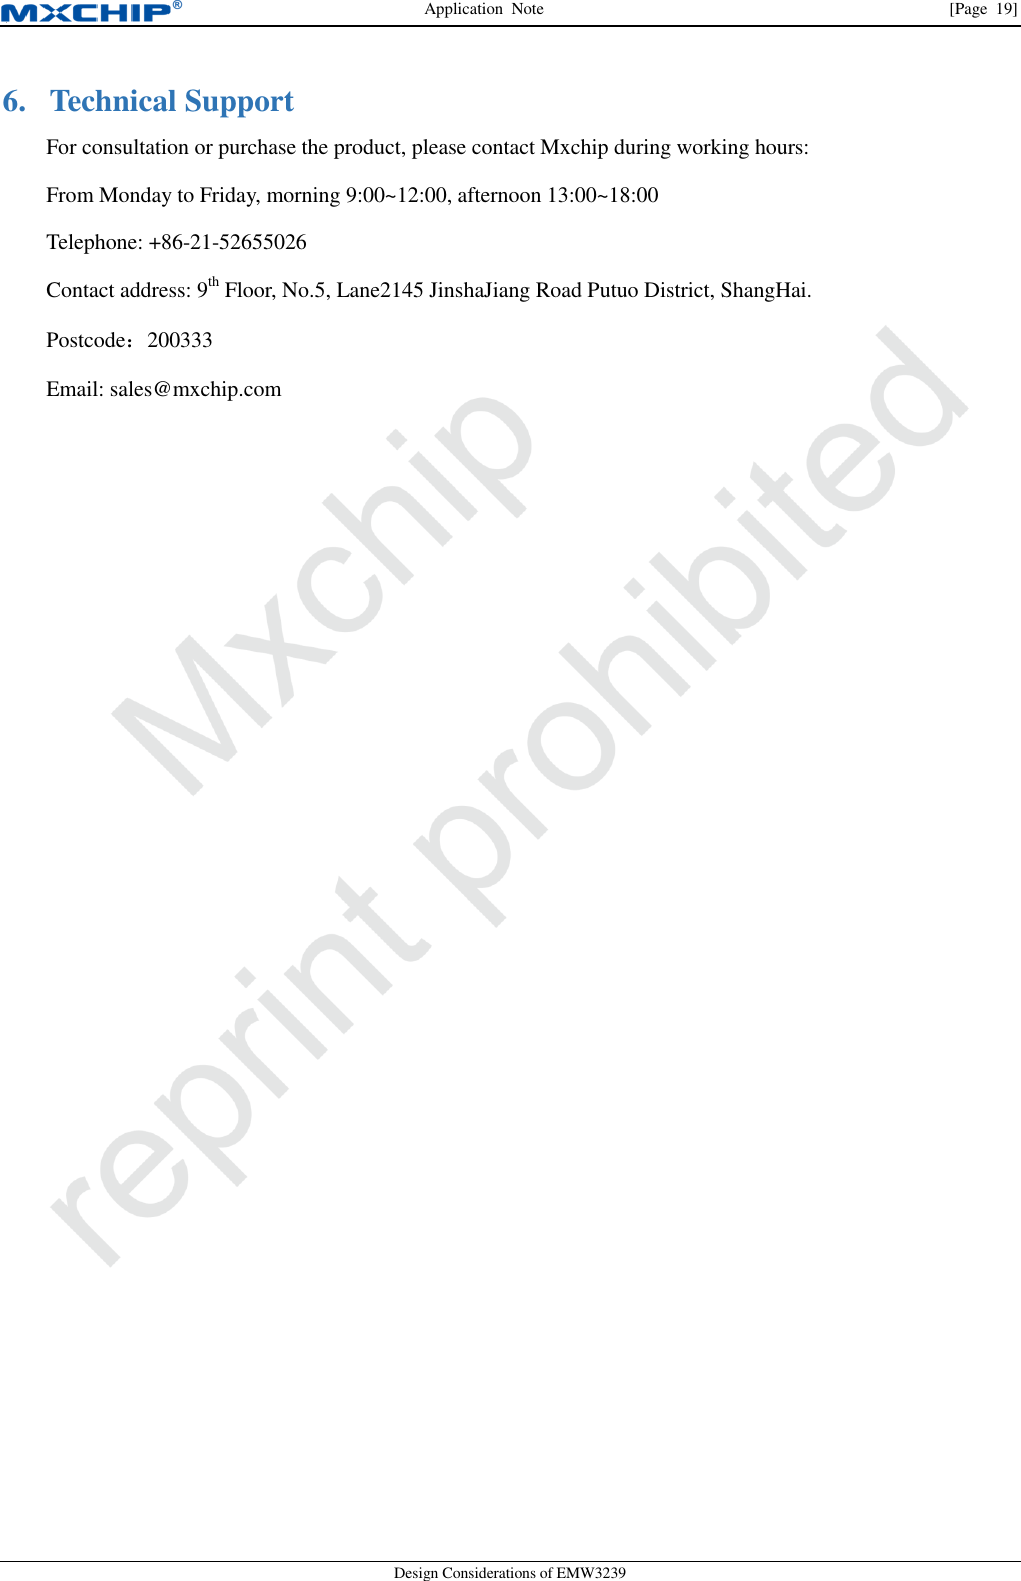 Application  Note  [Page  19] Design Considerations of EMW3239 6. Technical SupportFor consultation or purchase the product, please contact Mxchip during working hours:From Monday to Friday, morning 9:00~12:00, afternoon 13:00~18:00Telephone: +86-21-52655026Contact address: 9th Floor, No.5, Lane2145 JinshaJiang Road Putuo District, ShangHai.Postcode：200333Email: sales@mxchip.com